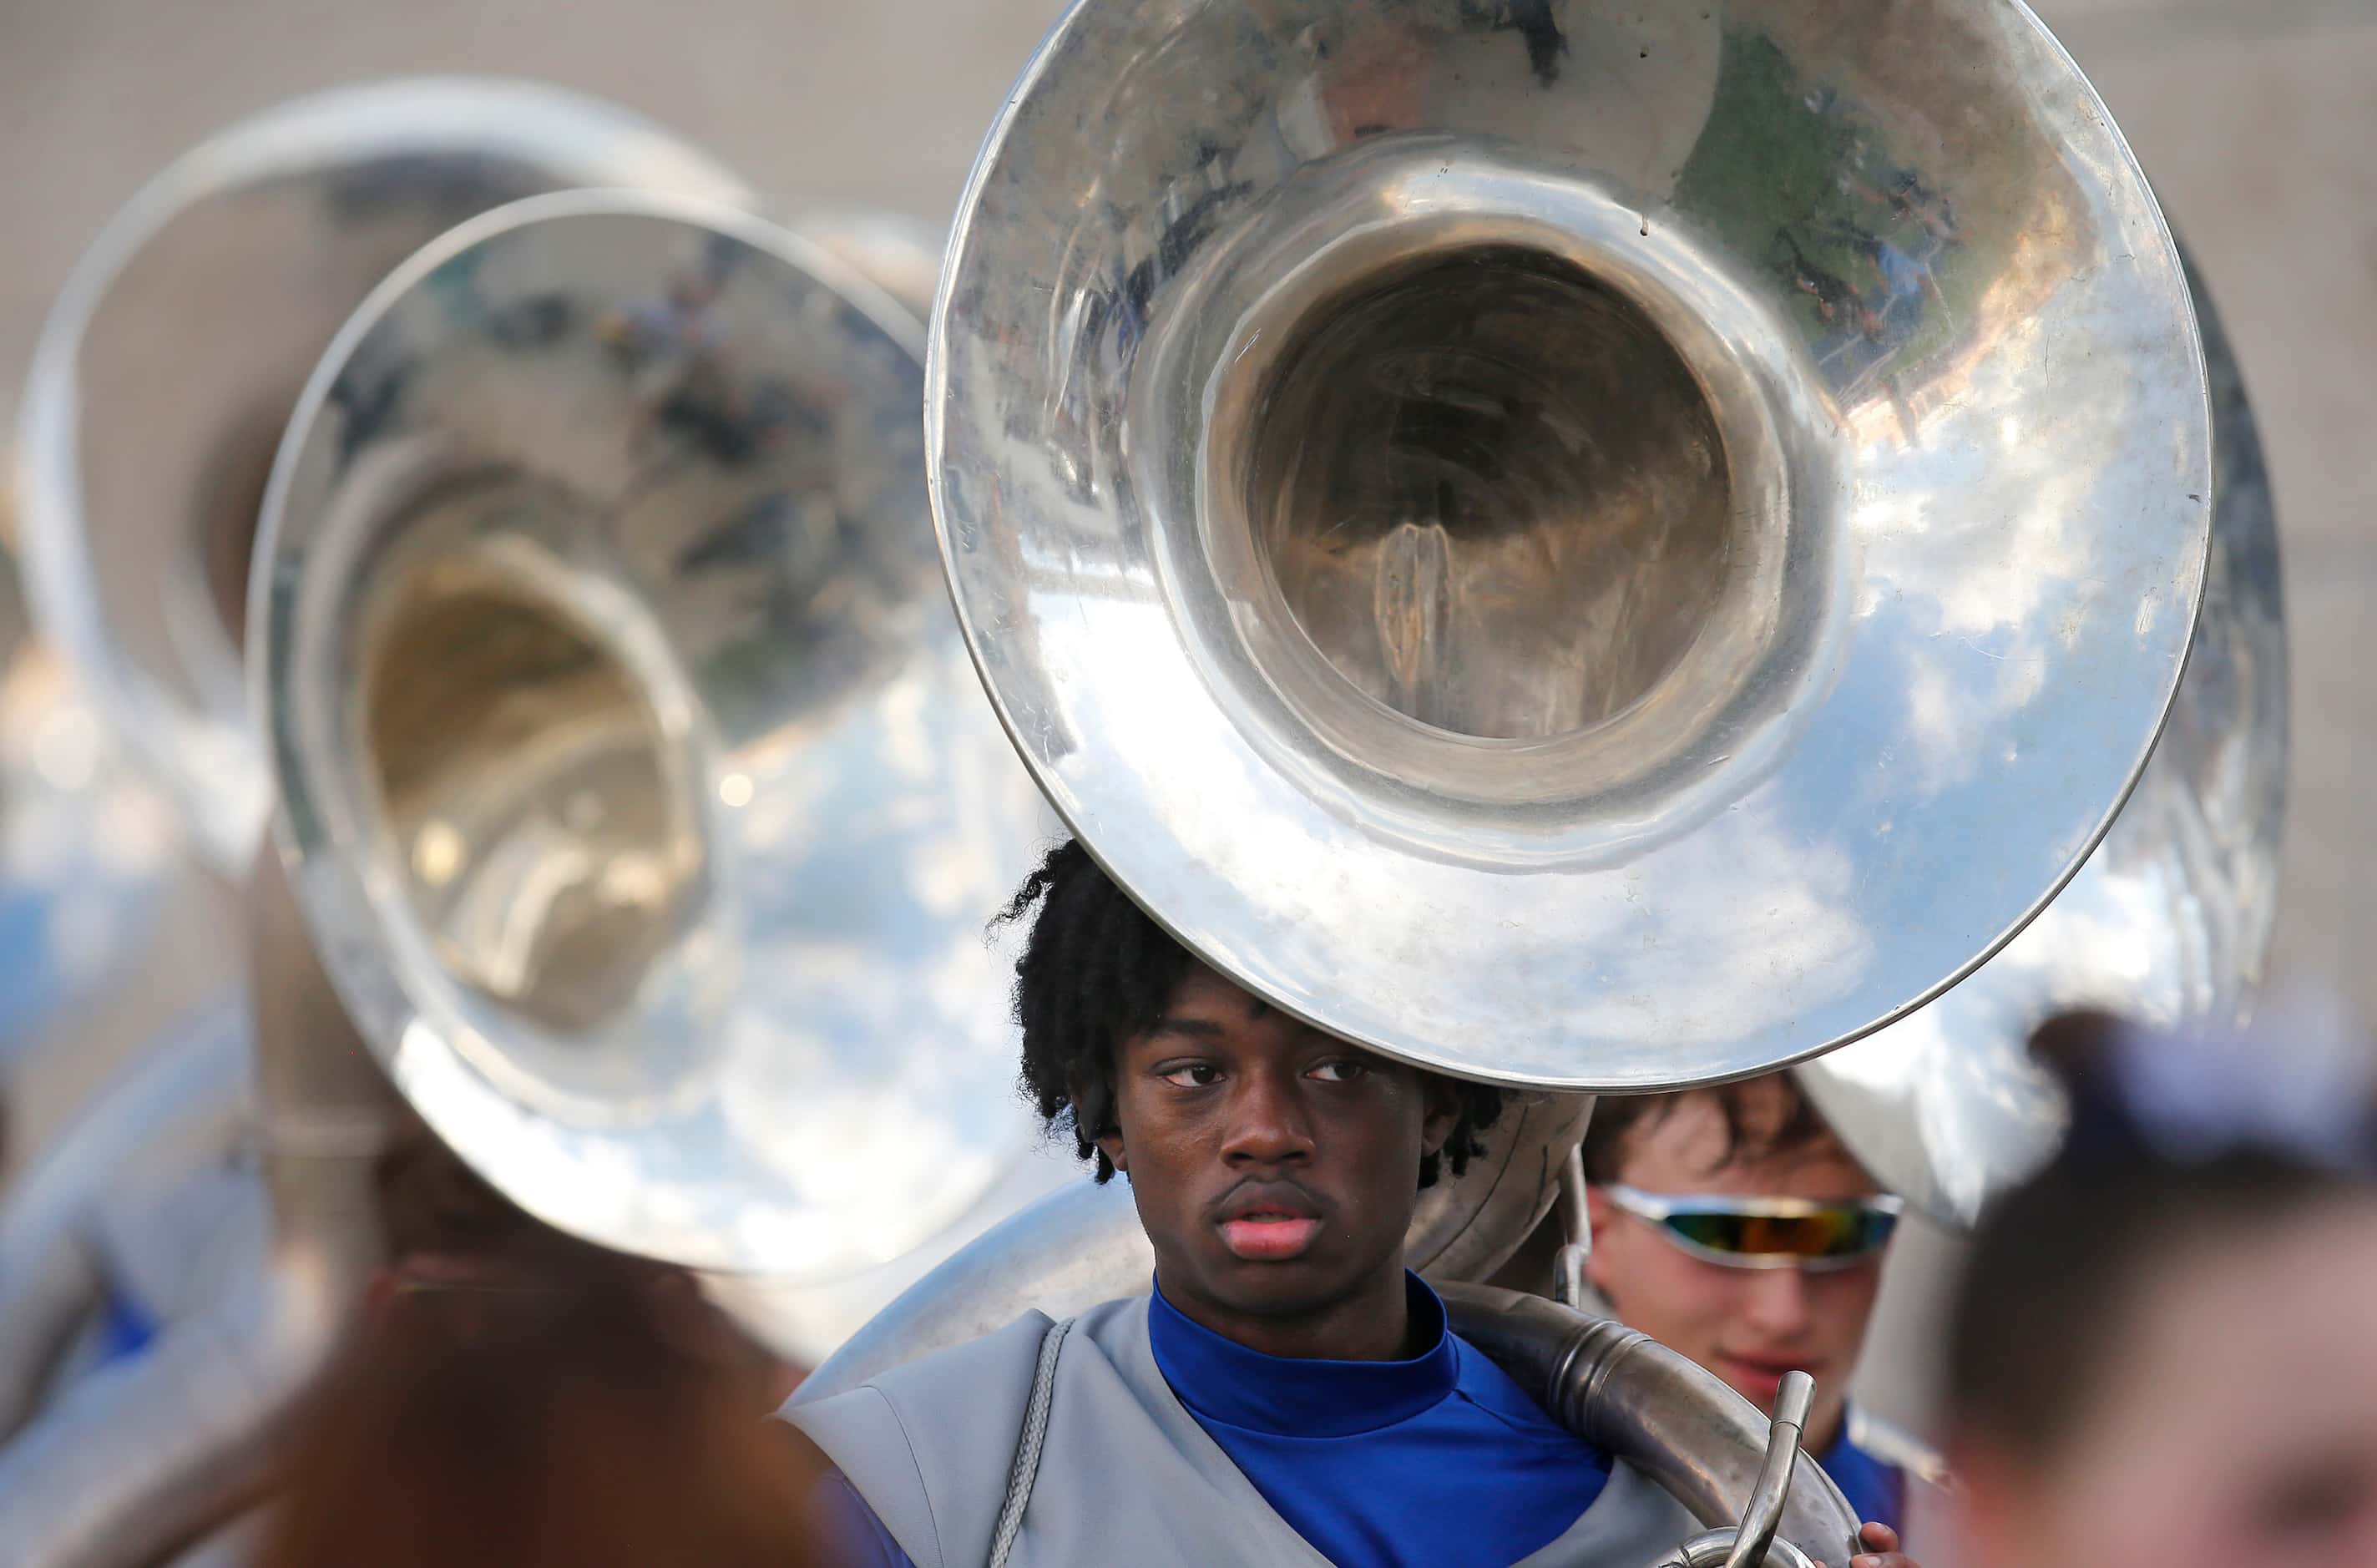 Allen High School marching band membr Renoll Morgan walks onto the field with his sousaphone...